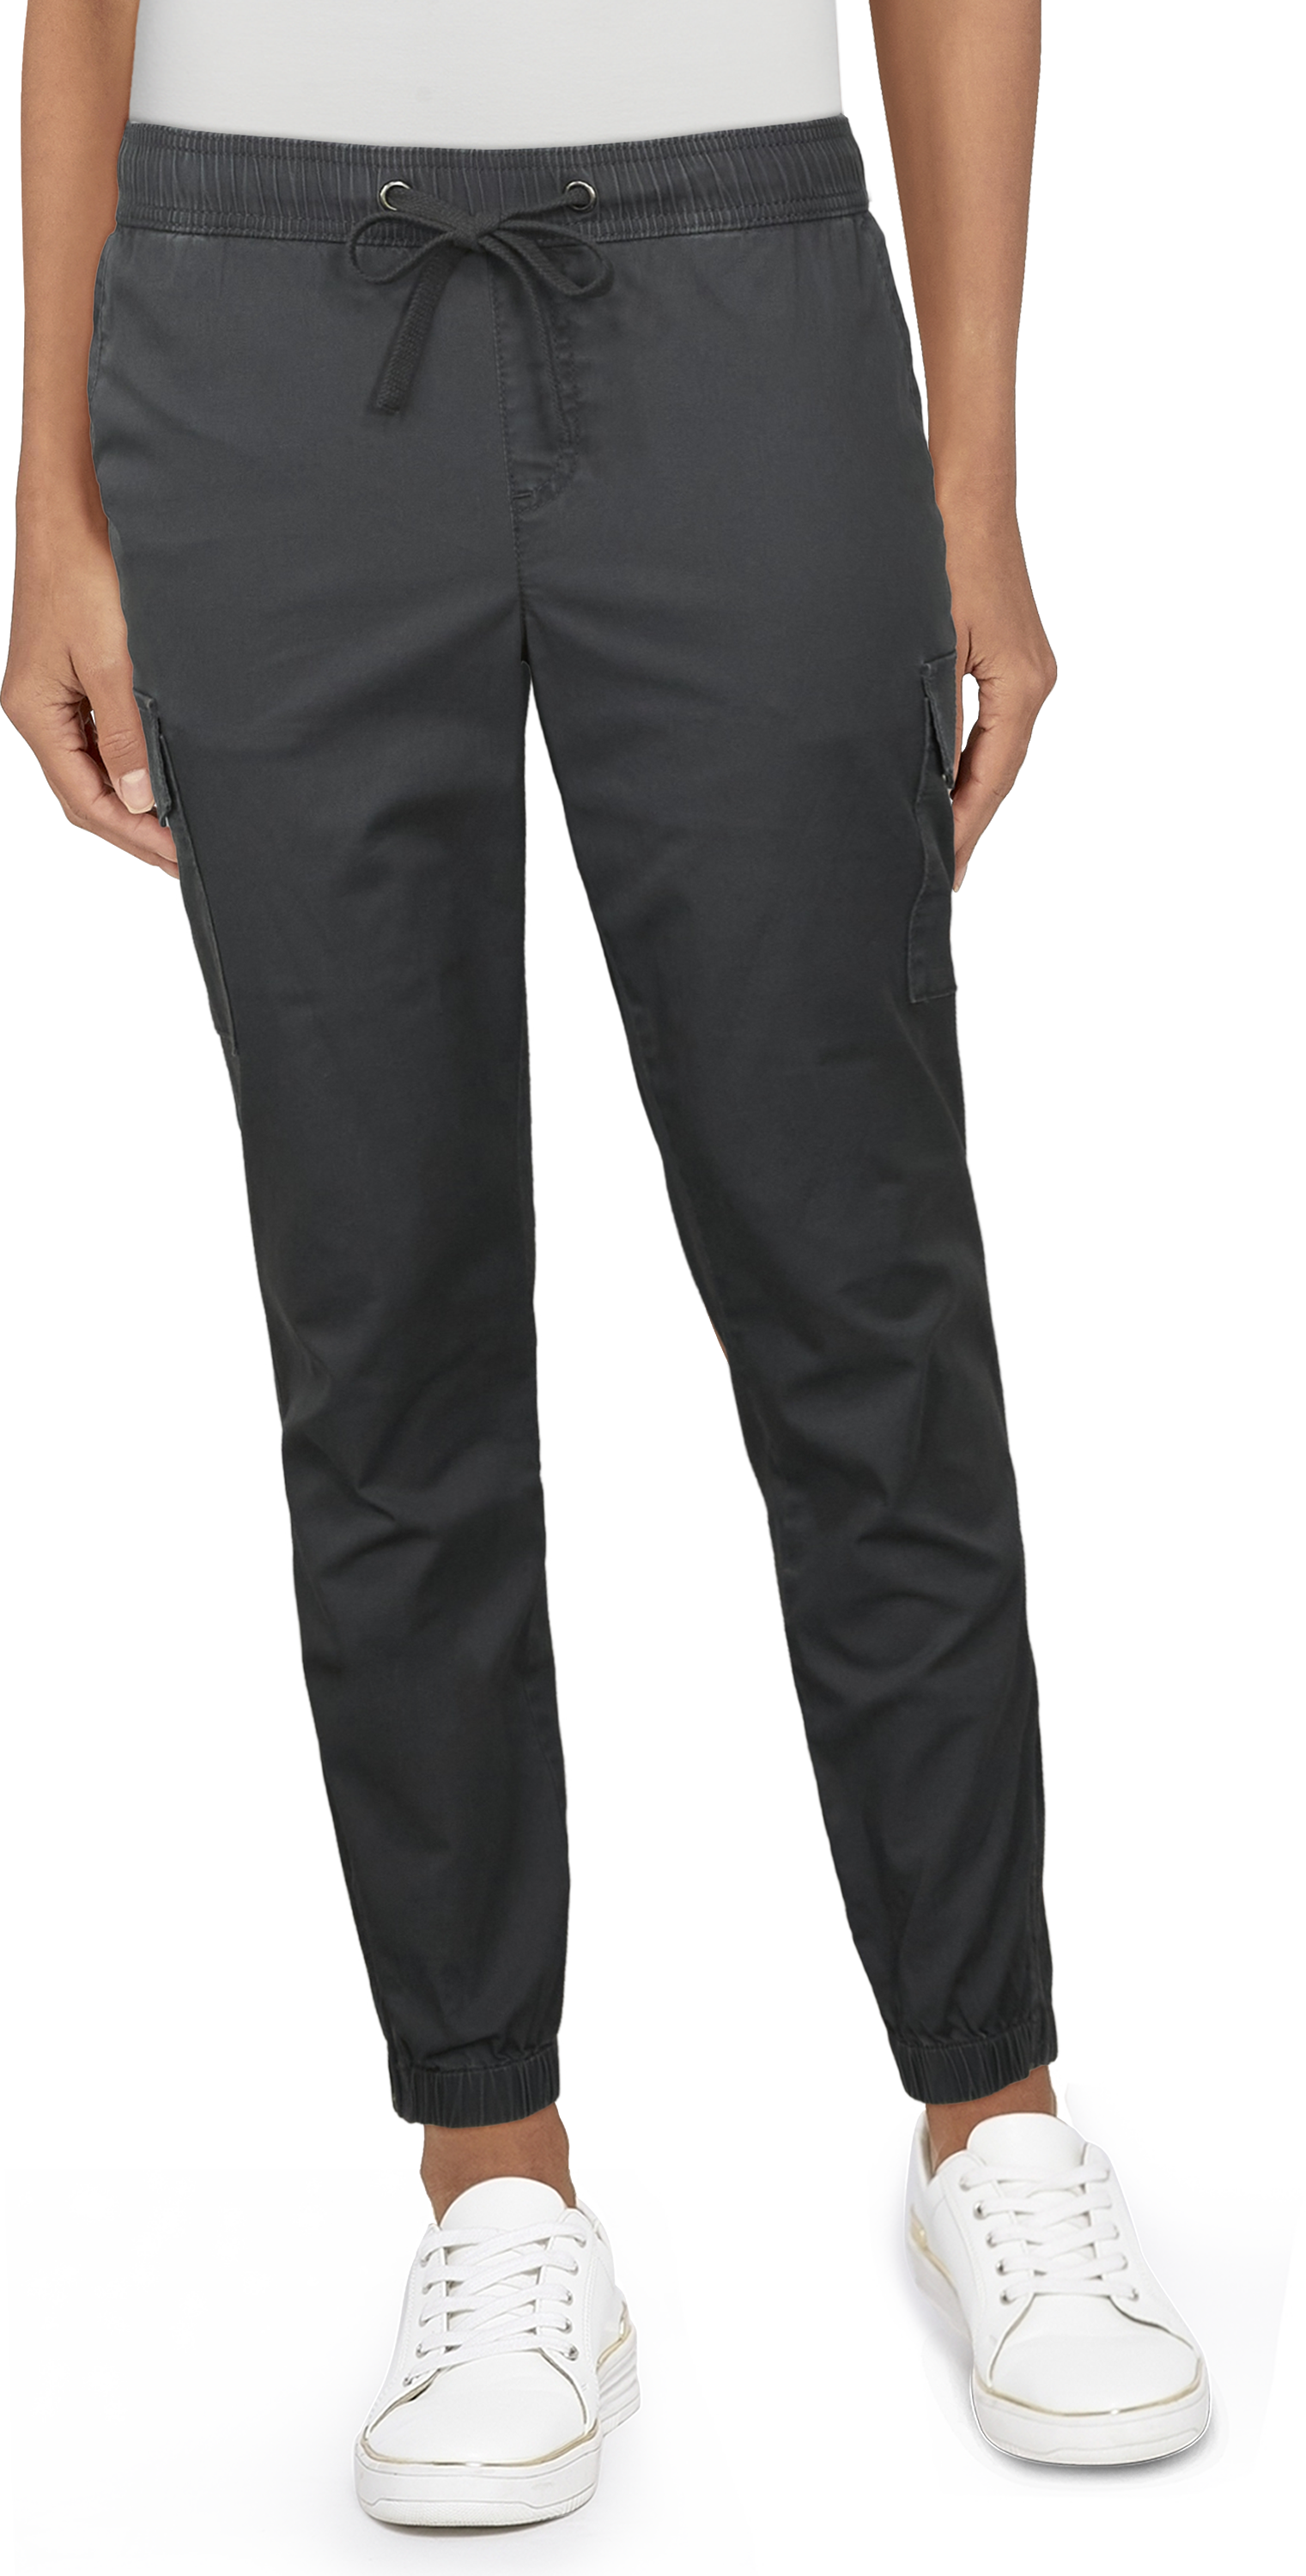 Natural Reflections Bella Vista Joggers for Ladies - New Graphite Gray - M